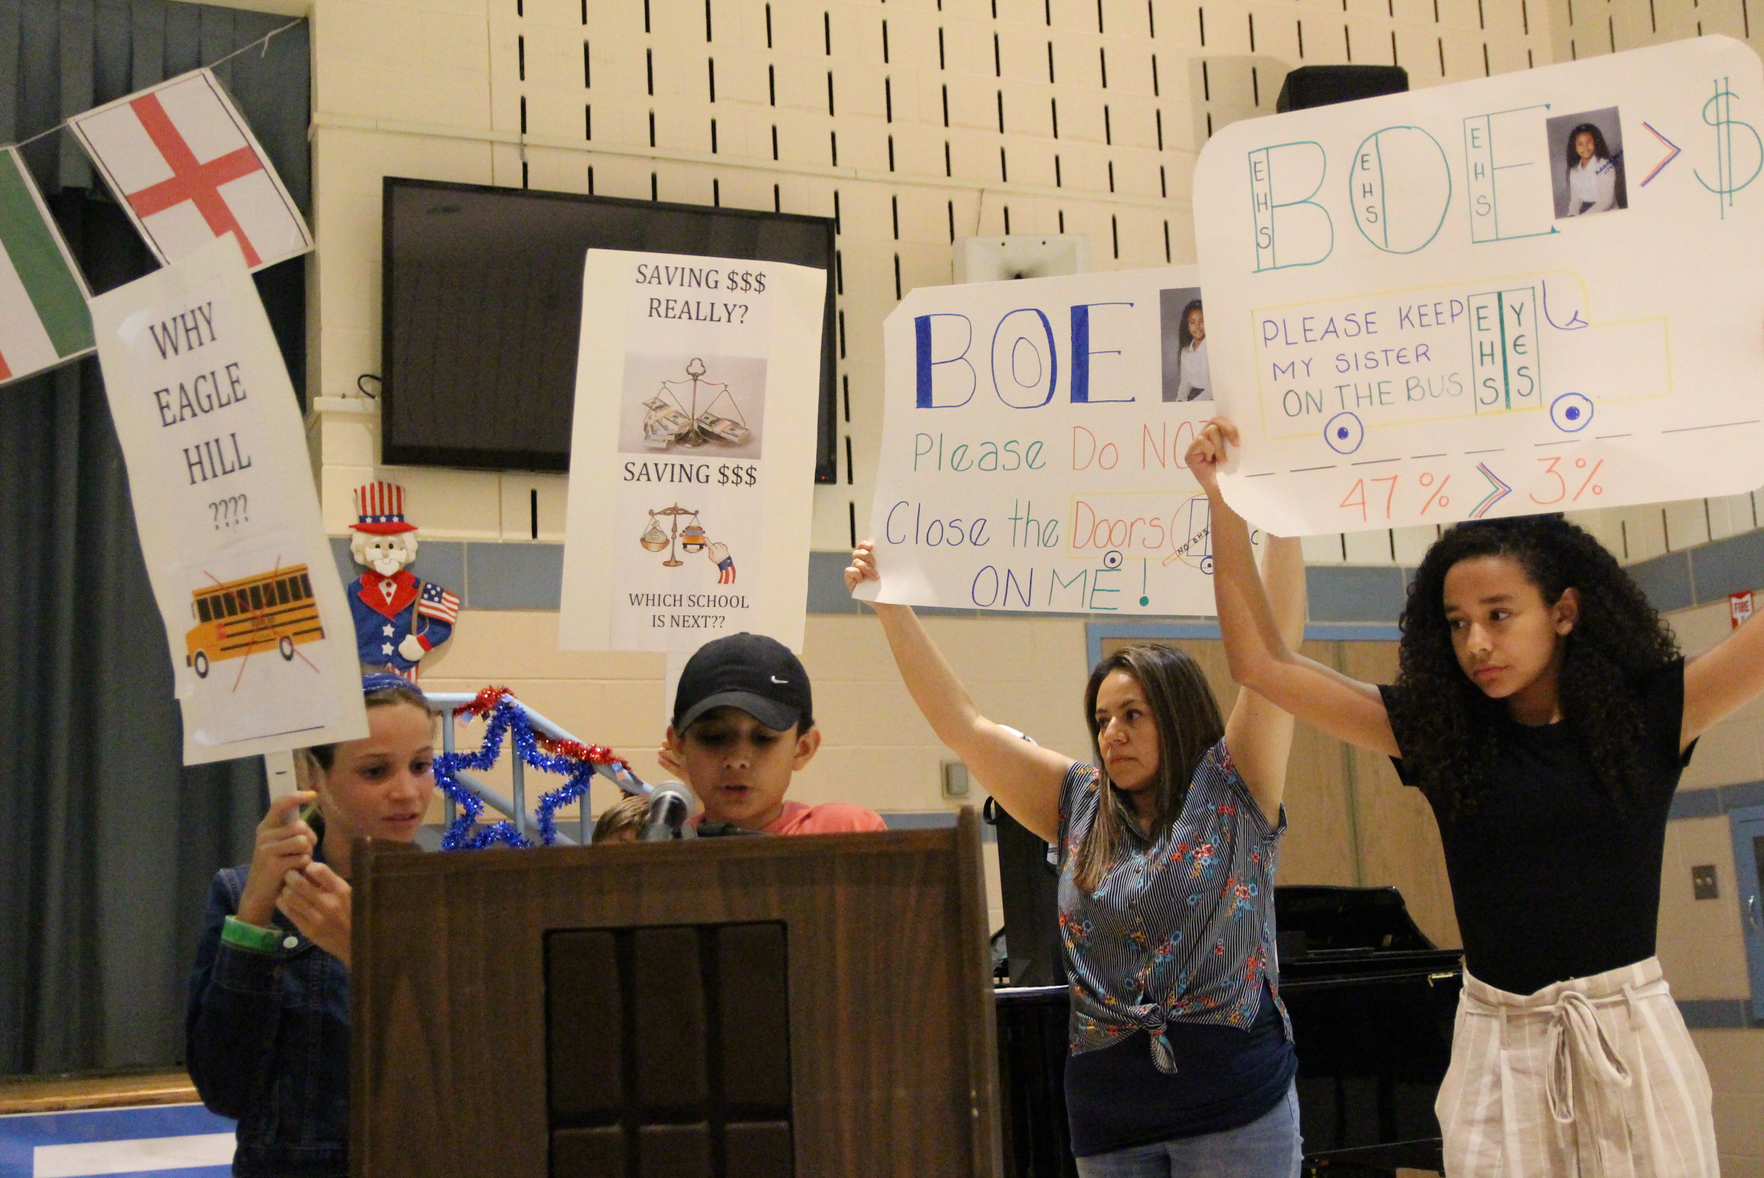 Families took the opportunity to voice their objection to loss of transportation to Eagle Hill School during the public hearing portion of the June, 2019 BOE meeting at Cos Cob School. June 13, 2019. Photo: Leslie Yager